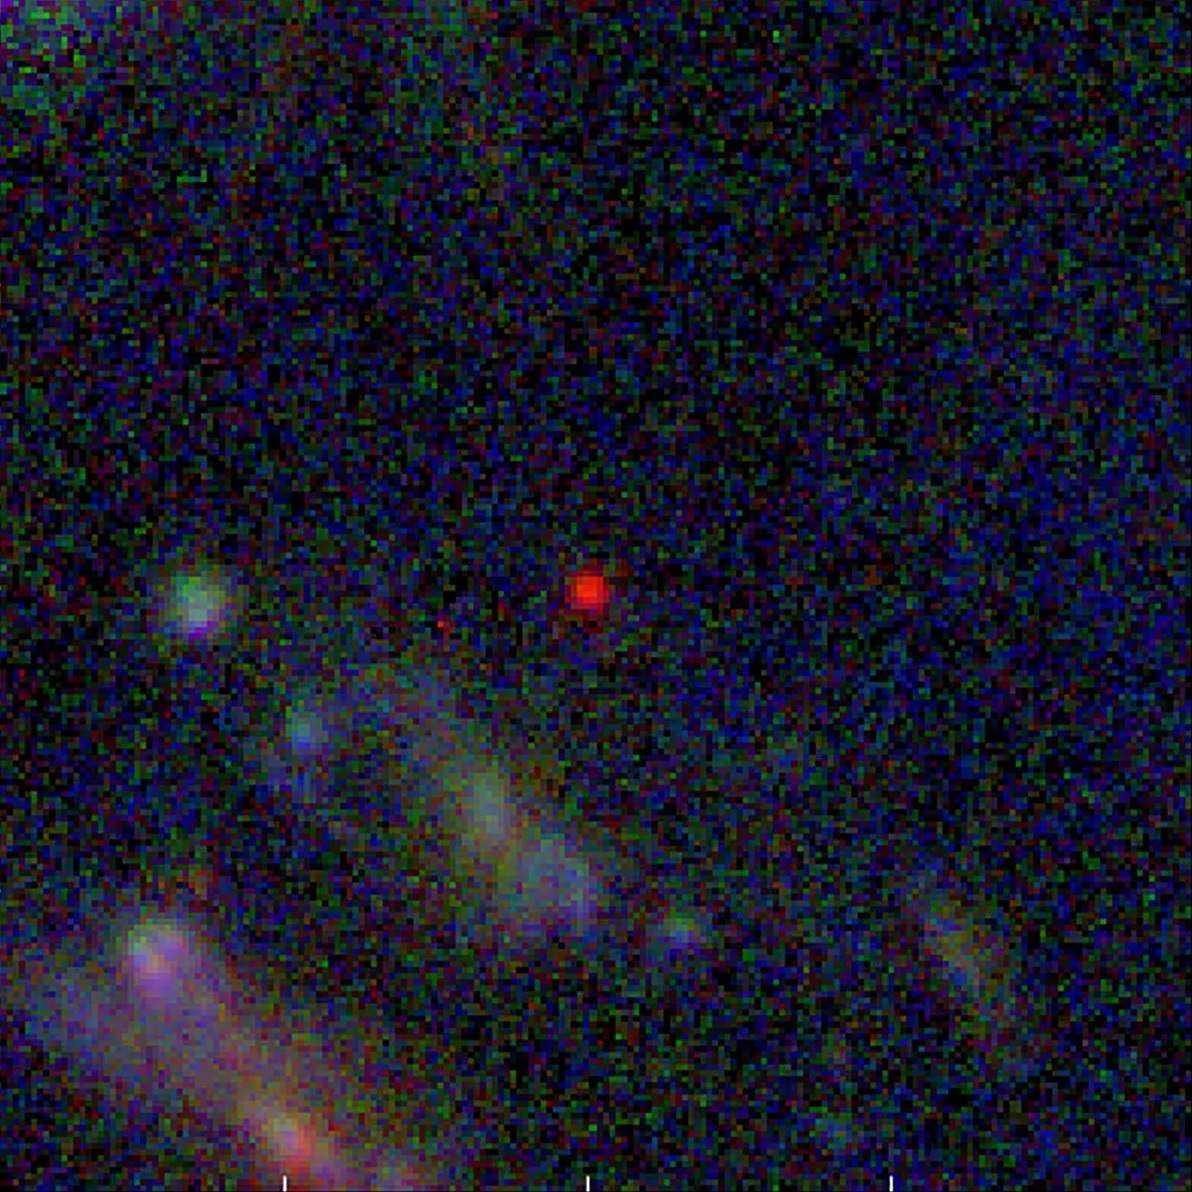 The image of the Galaxy GLASS-z13 zoomed out